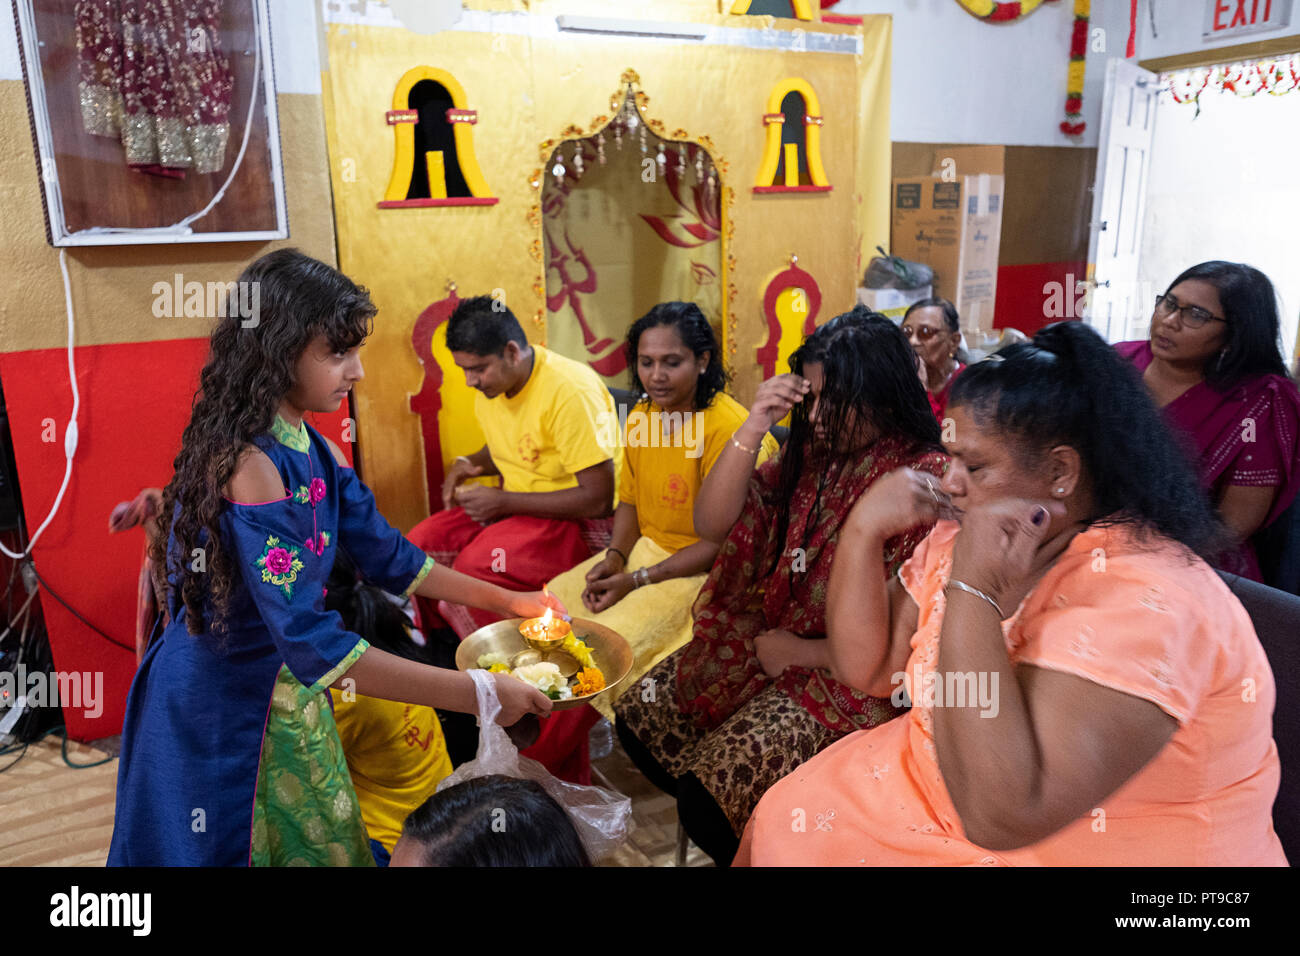 A young girl in a sari passes Hindu worshippers with a plate of flowers & a candle at a temple in Richmond Hill, Queens, New York. Stock Photo